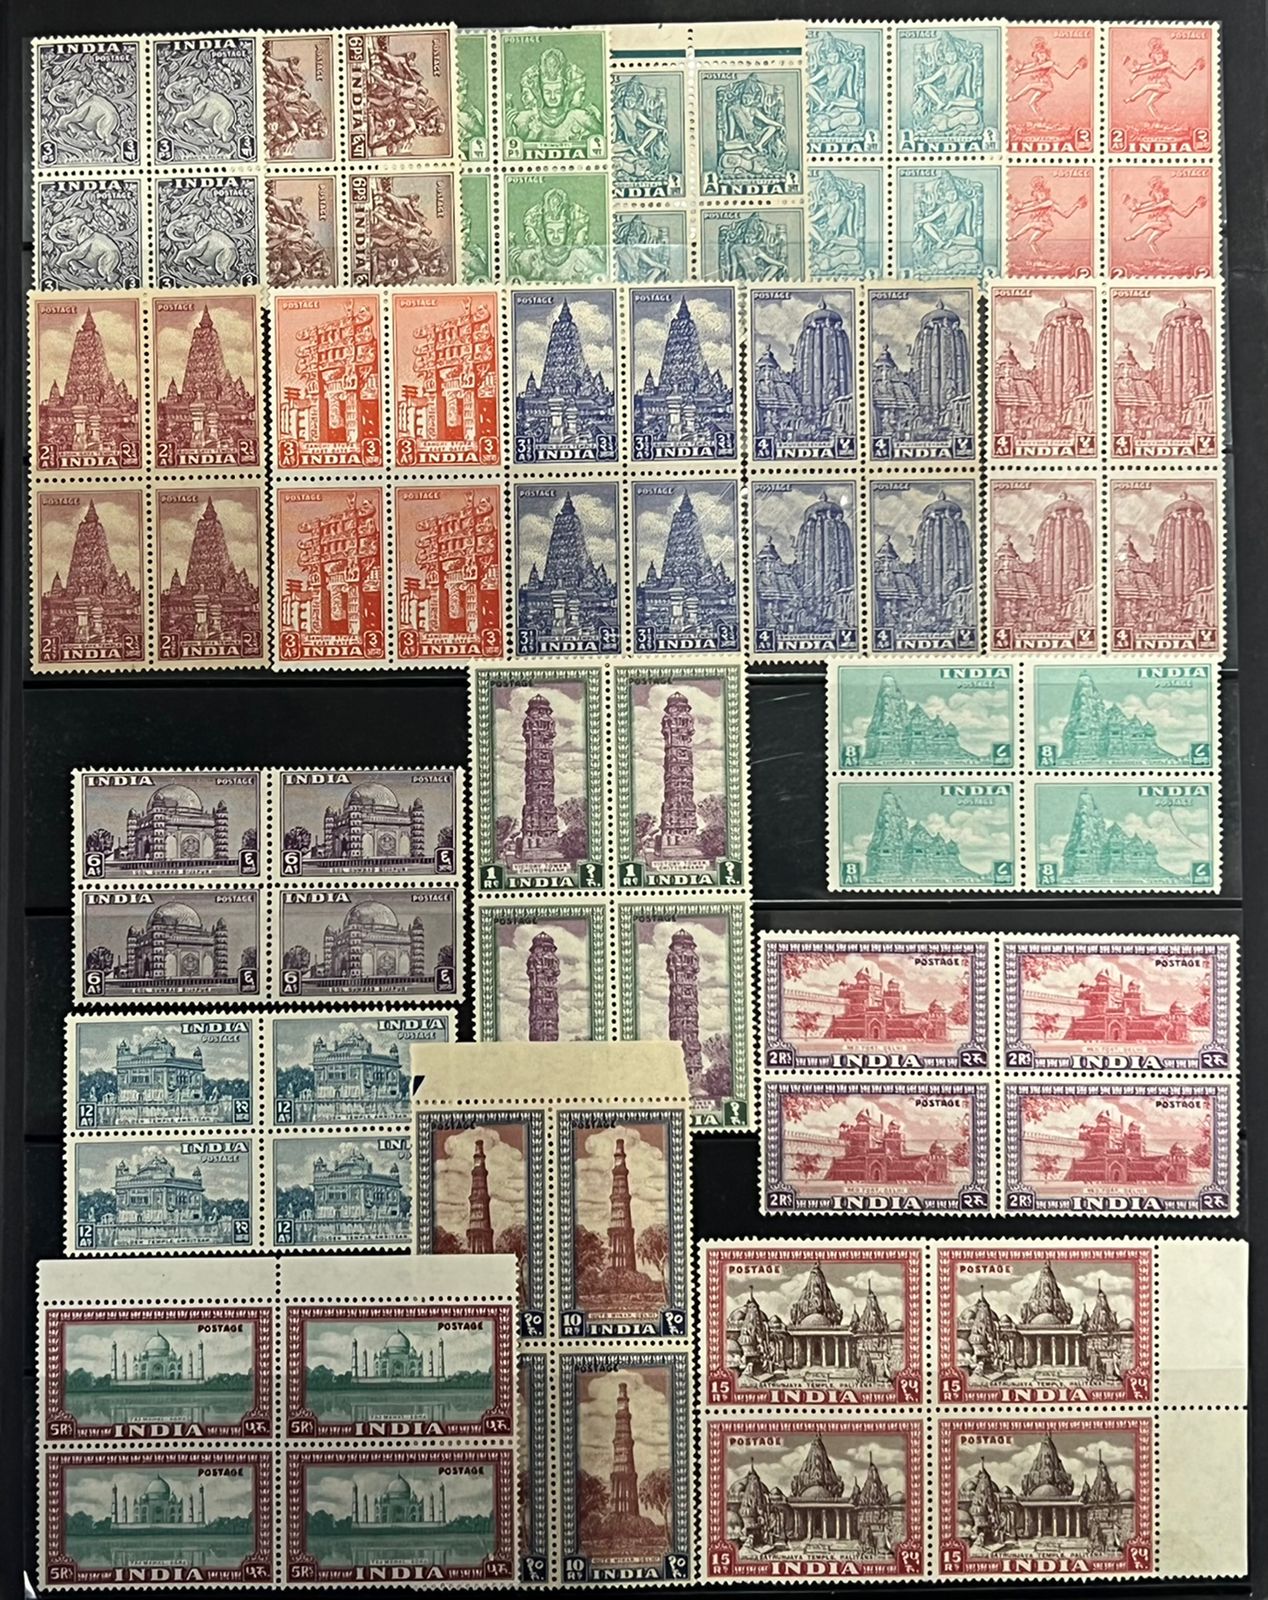 India 1949 First Definitive Series Archeological Complete Set of 19v in Blocks of 4 MNH White Gum